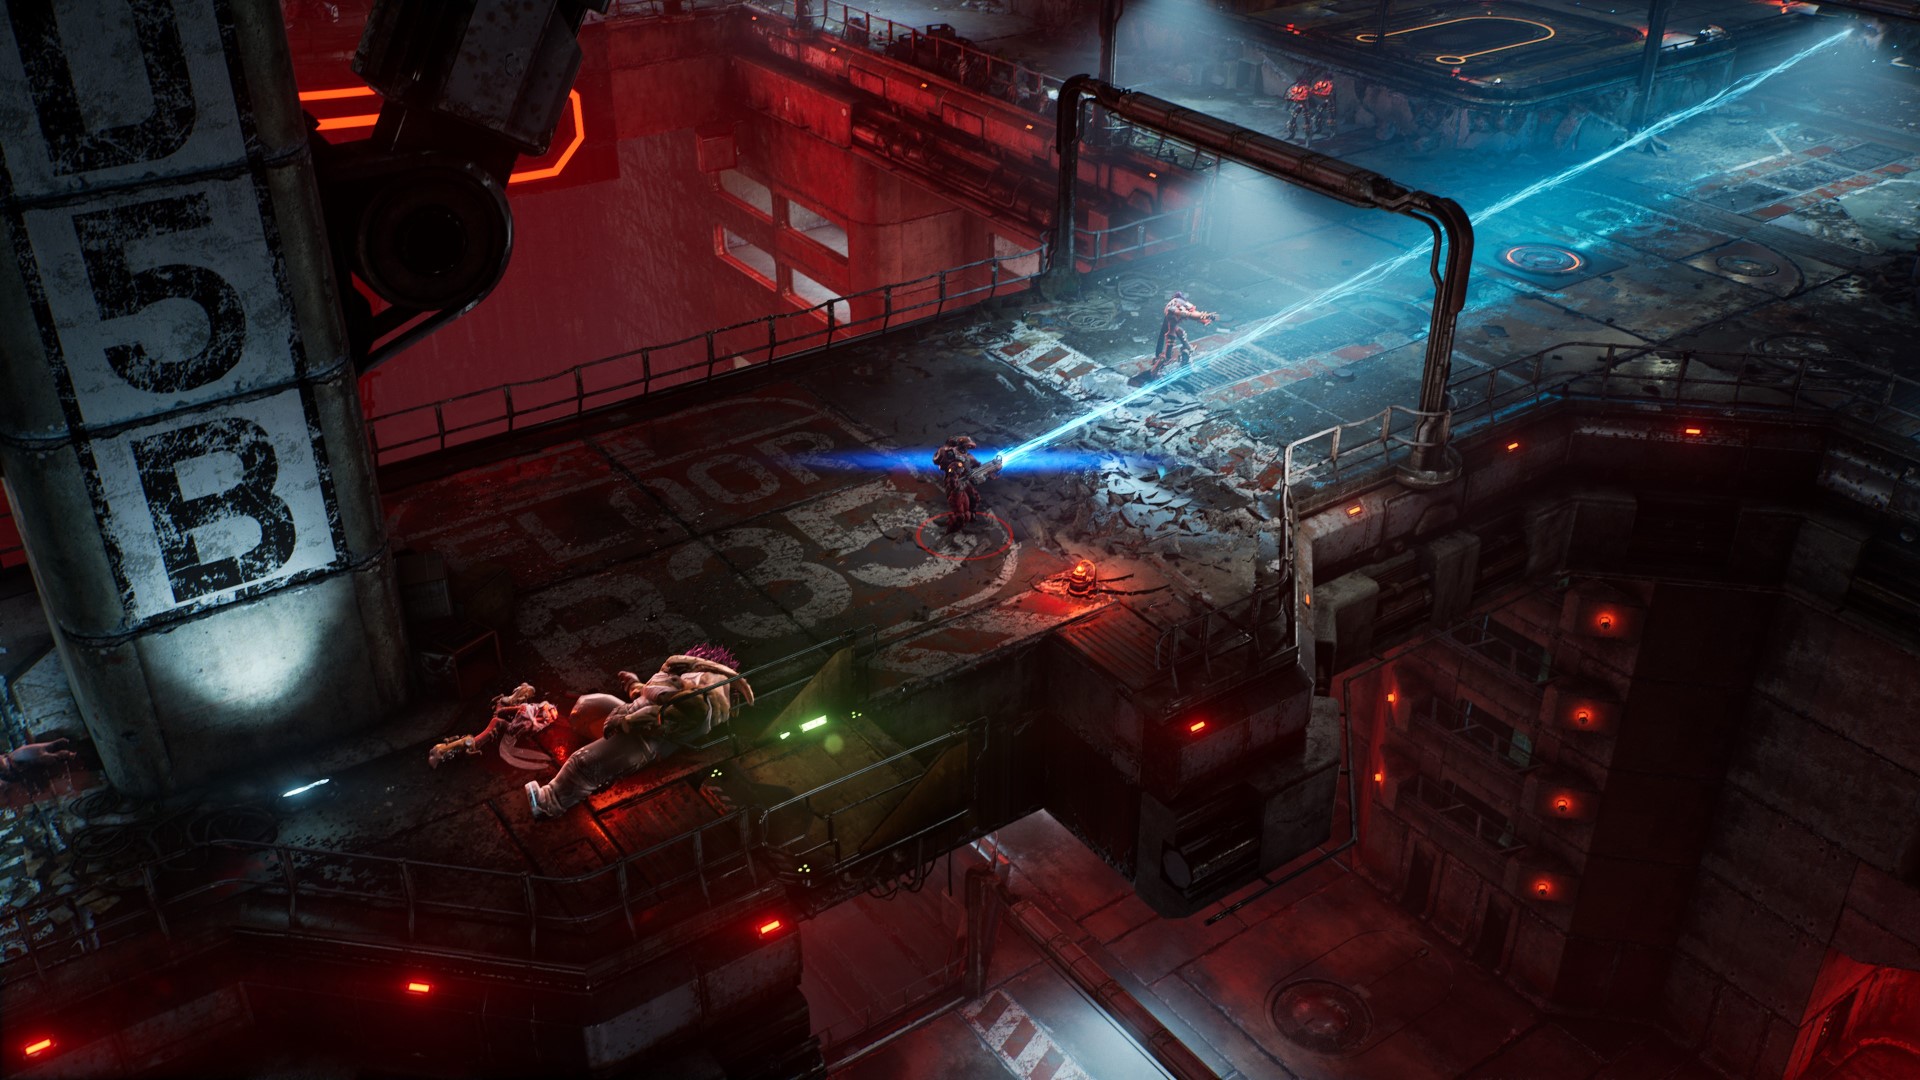 The player running through a city street weapon drawn